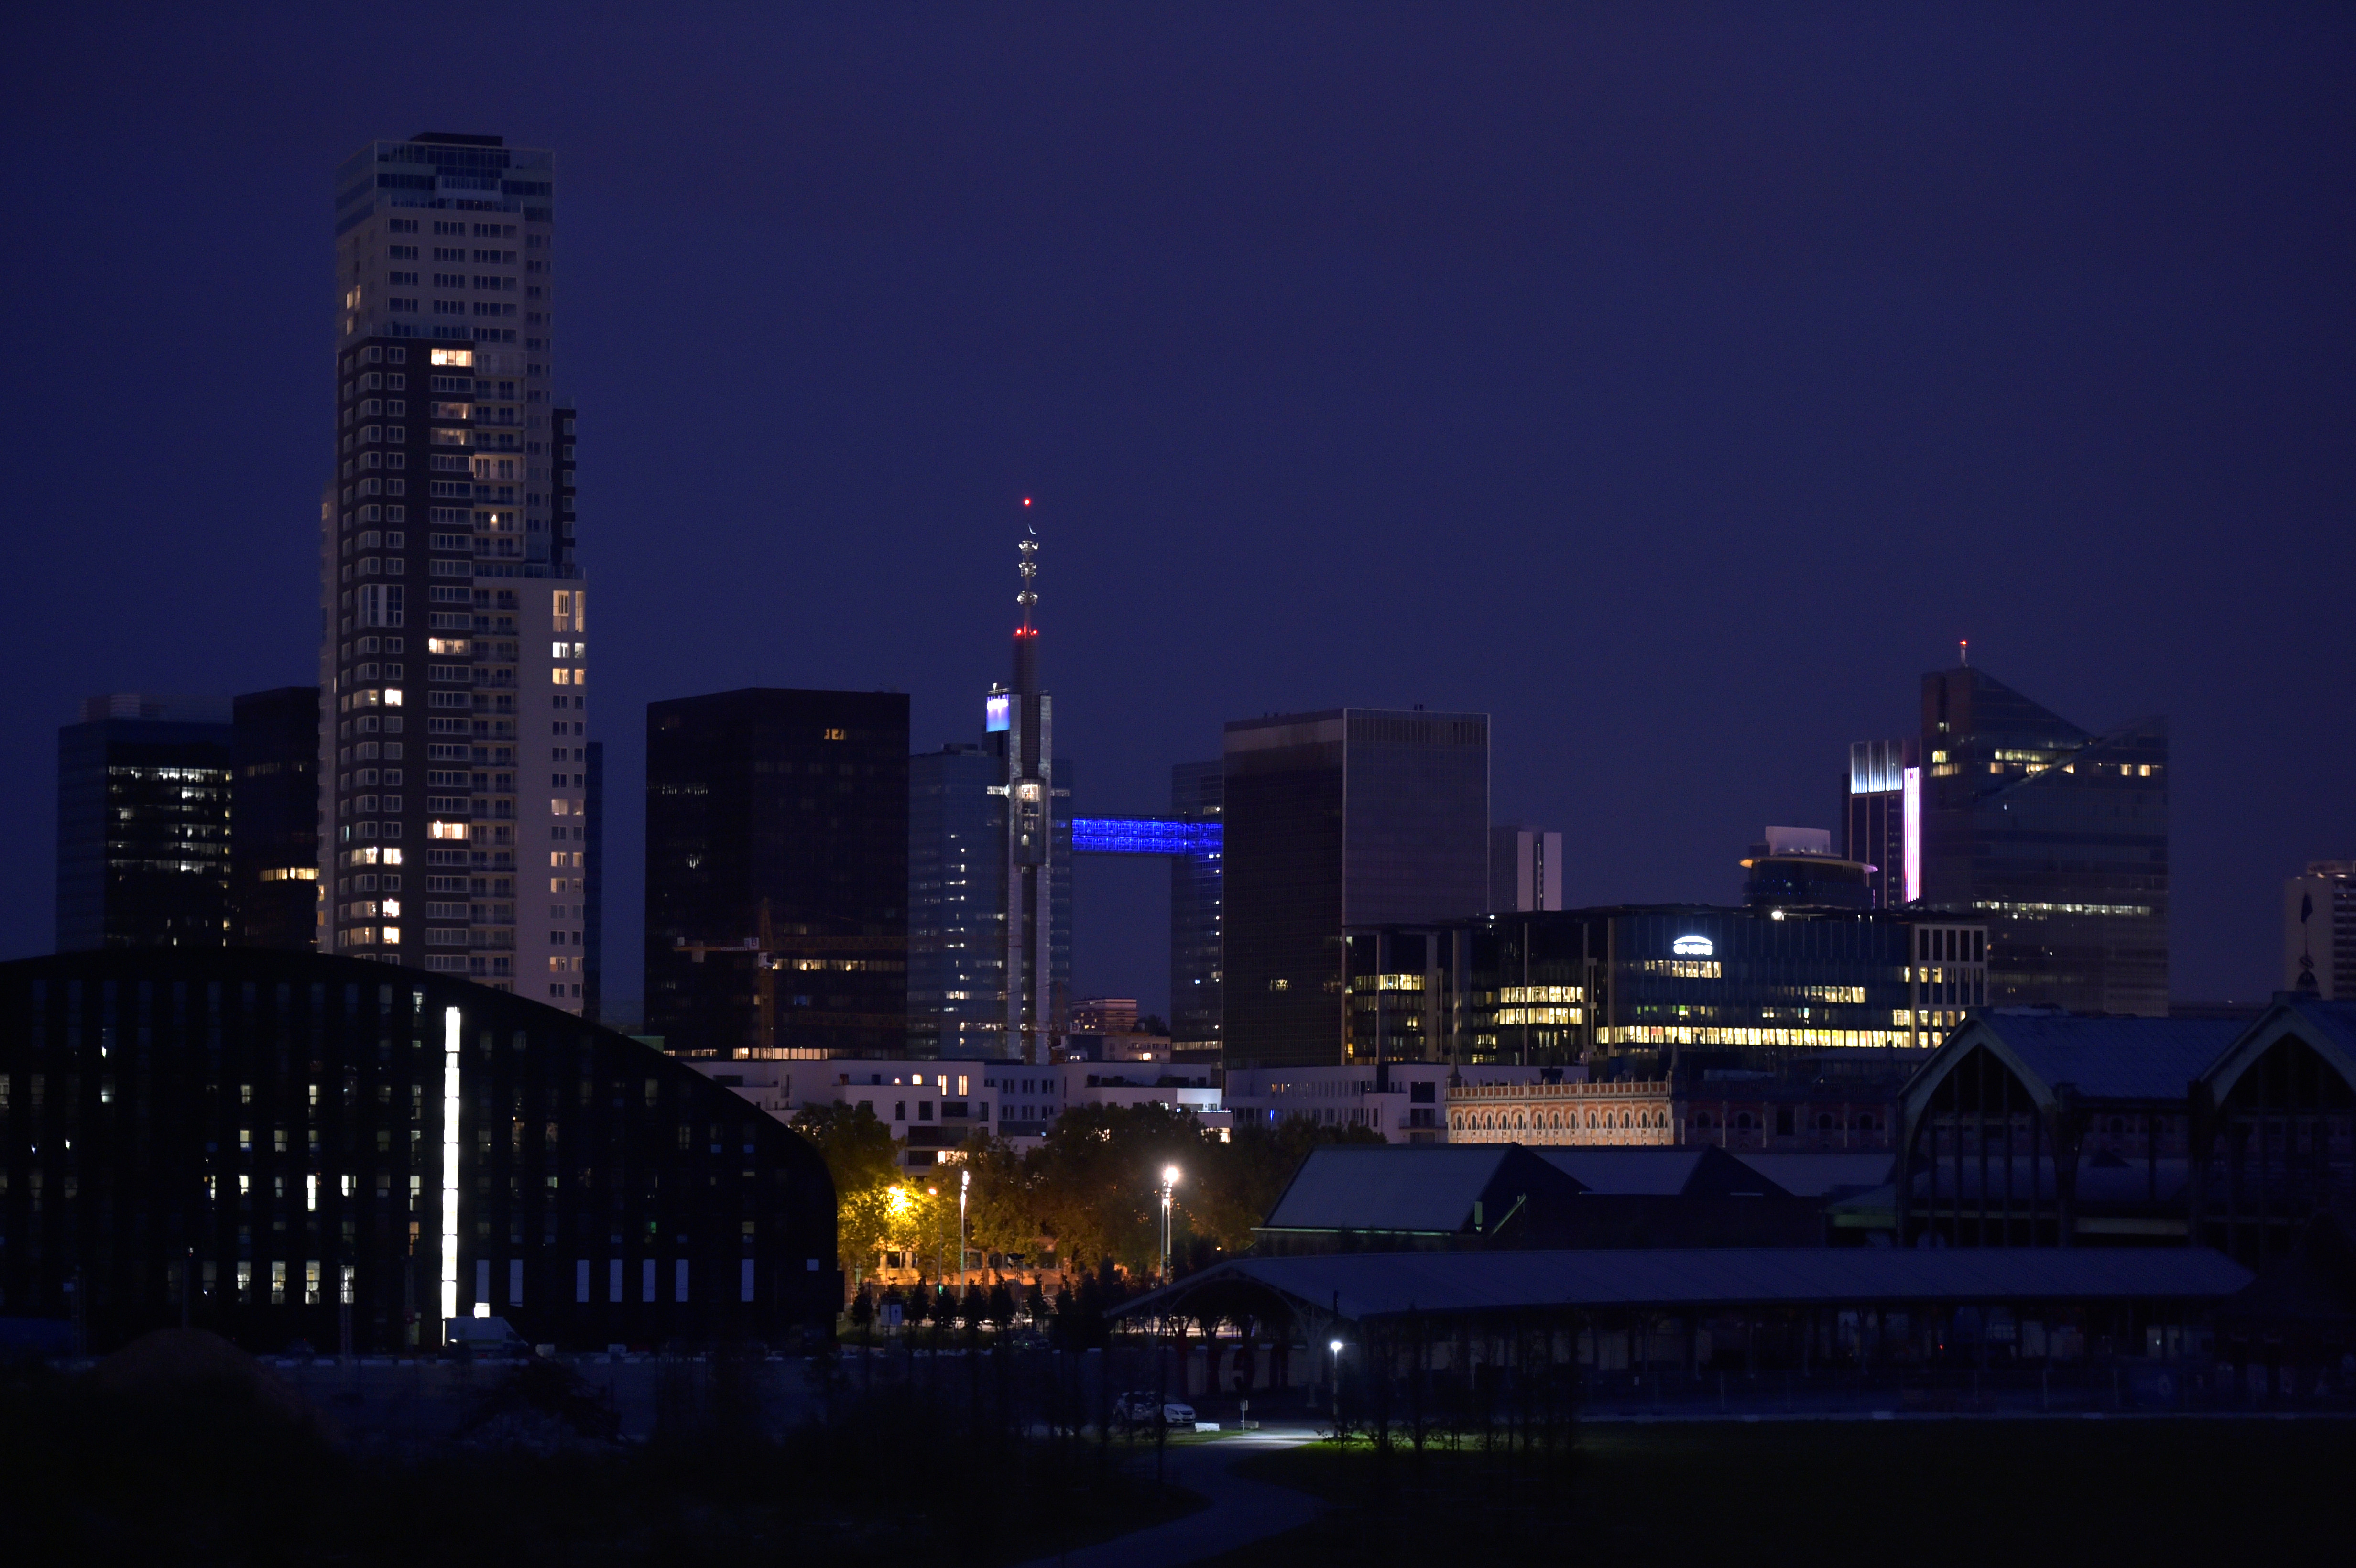 Night shot of illuminated city business district in Brussels